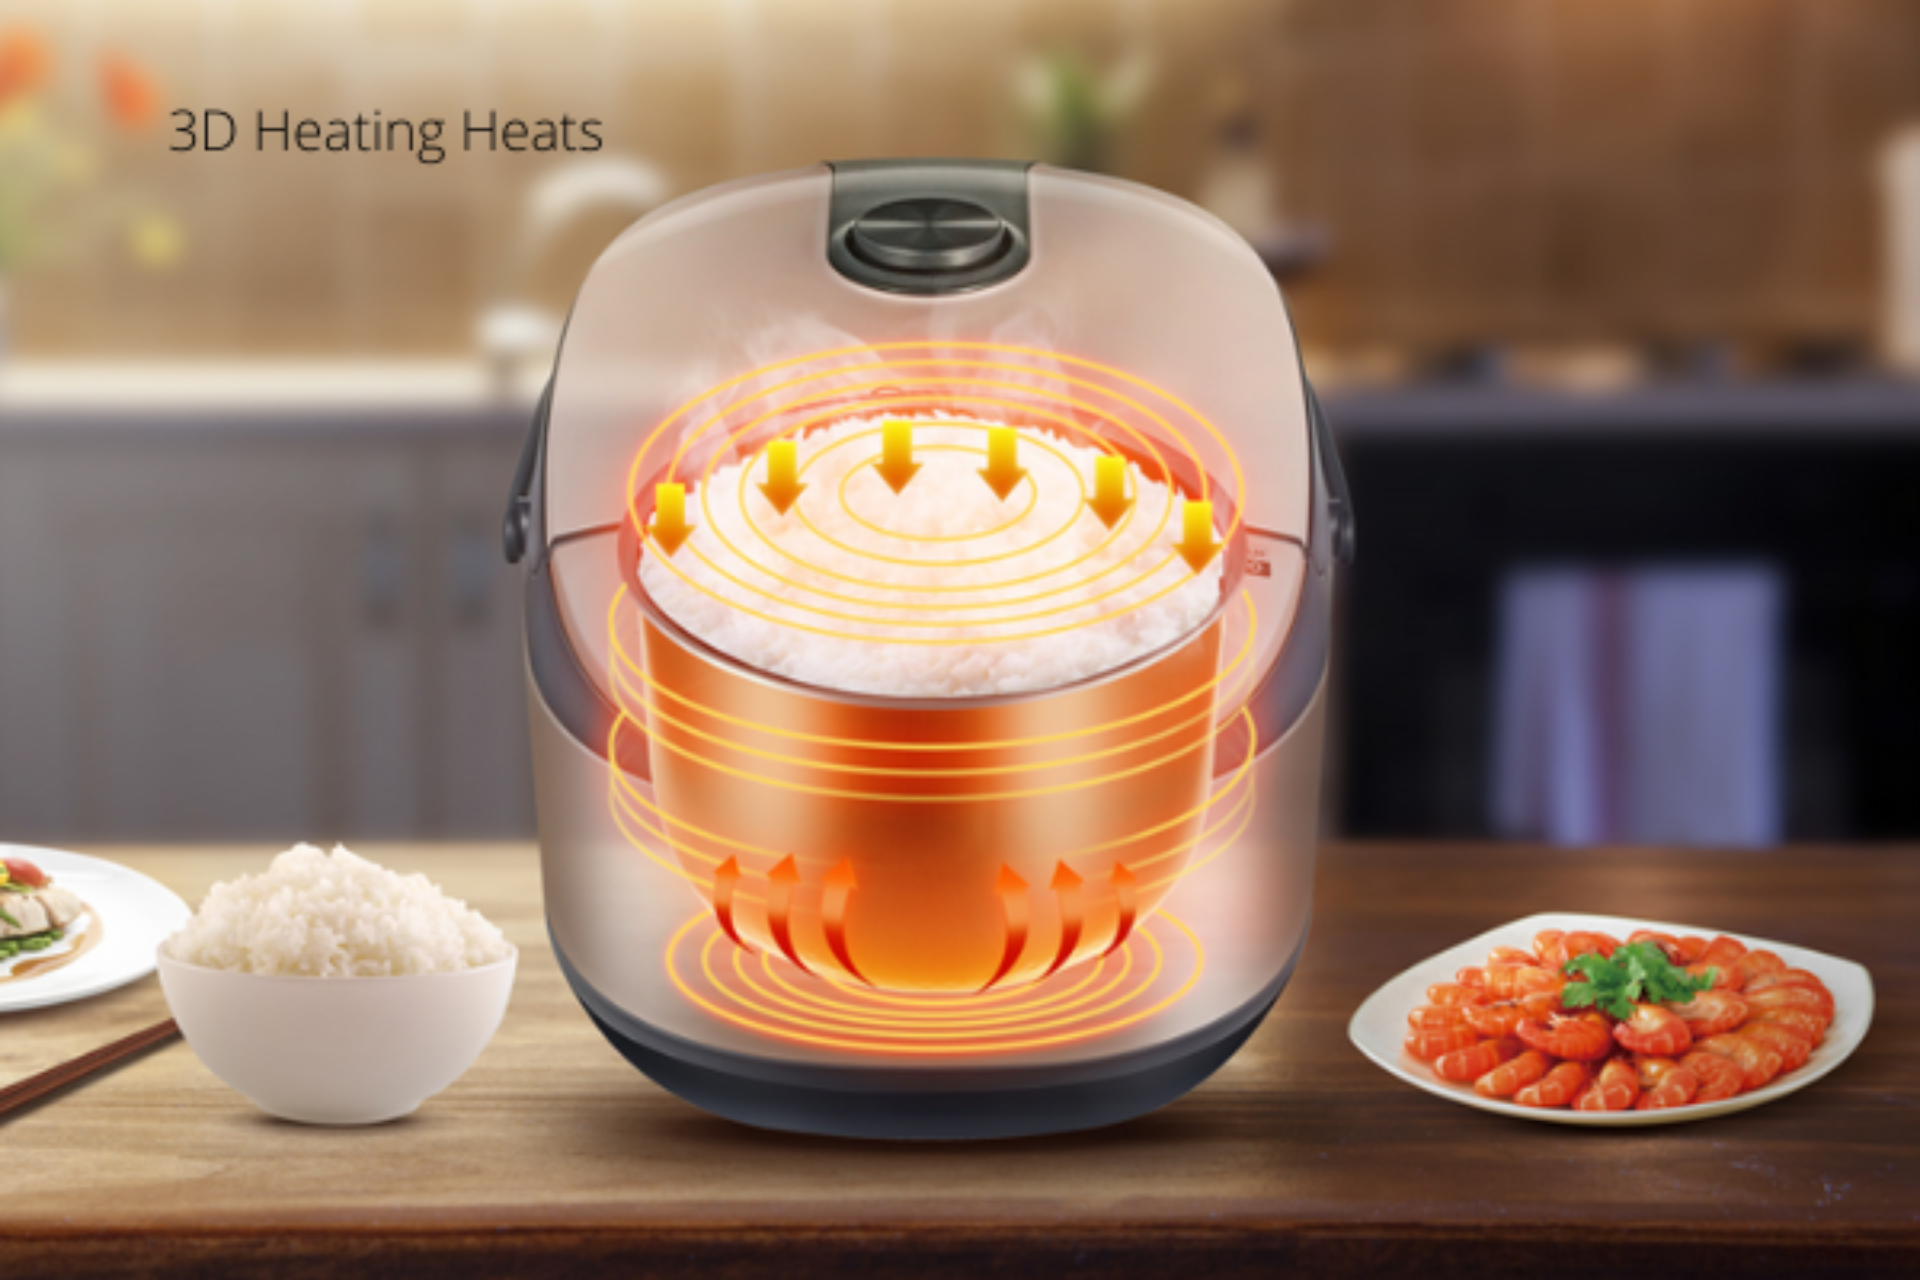 https://www.midea.com/content/dam/midea-aem/my/kitchen-appliances/cookers/rice-cookers/1-8l-digital-rice-cooker-mb-d1809gl/gallery2.png